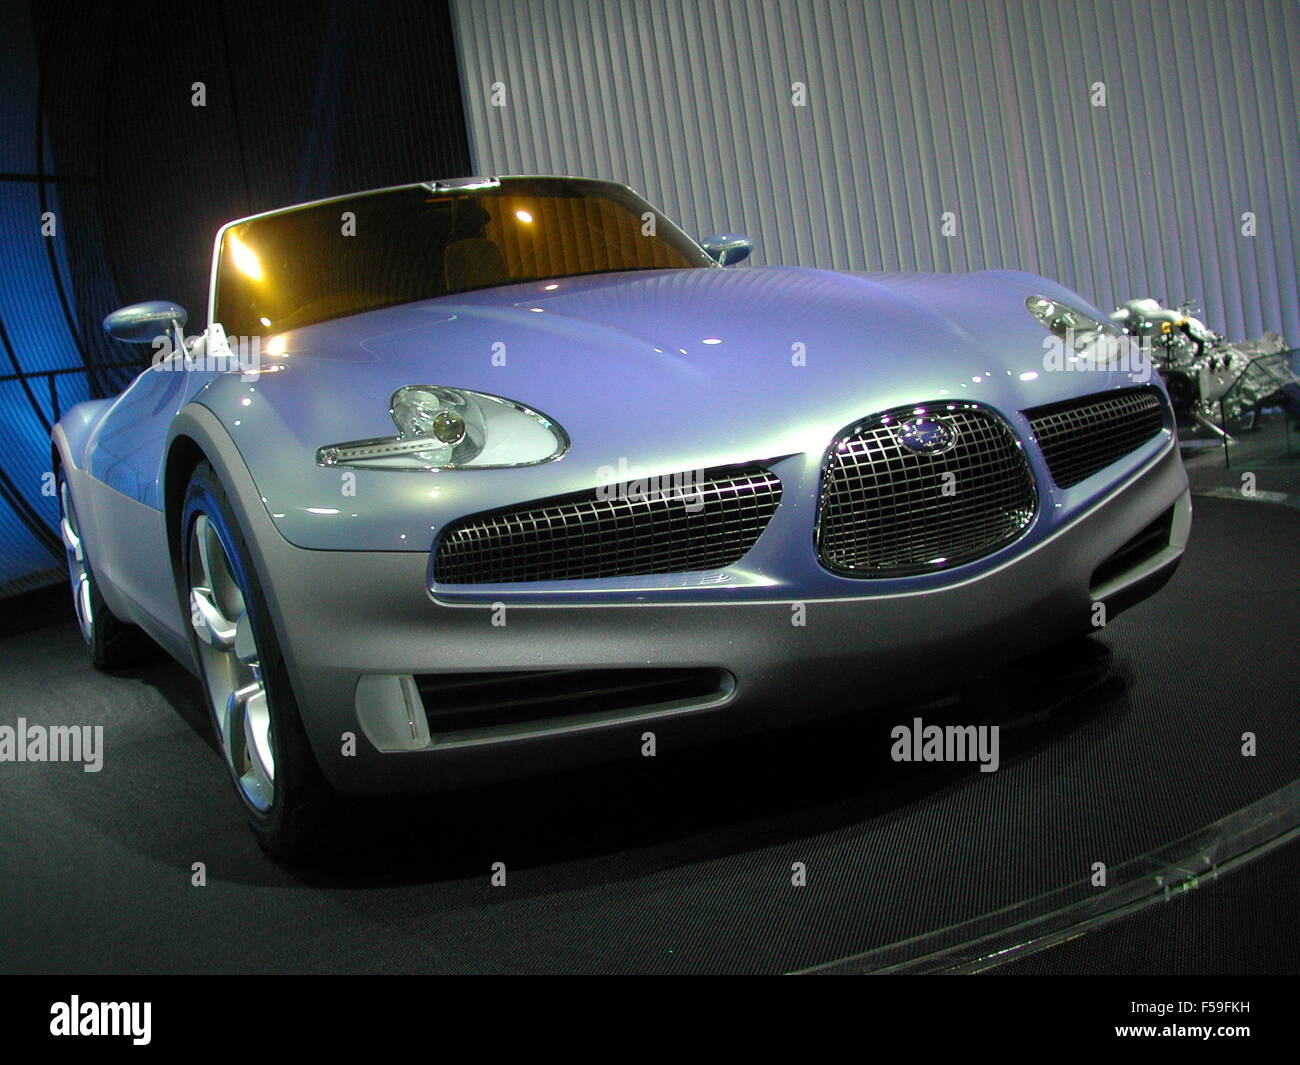 Subaru B9 Scrambler concept car shown at the 2003 motorshow in tokyo designed by Andreas Zapatinas - showing the front low view Stock Photo